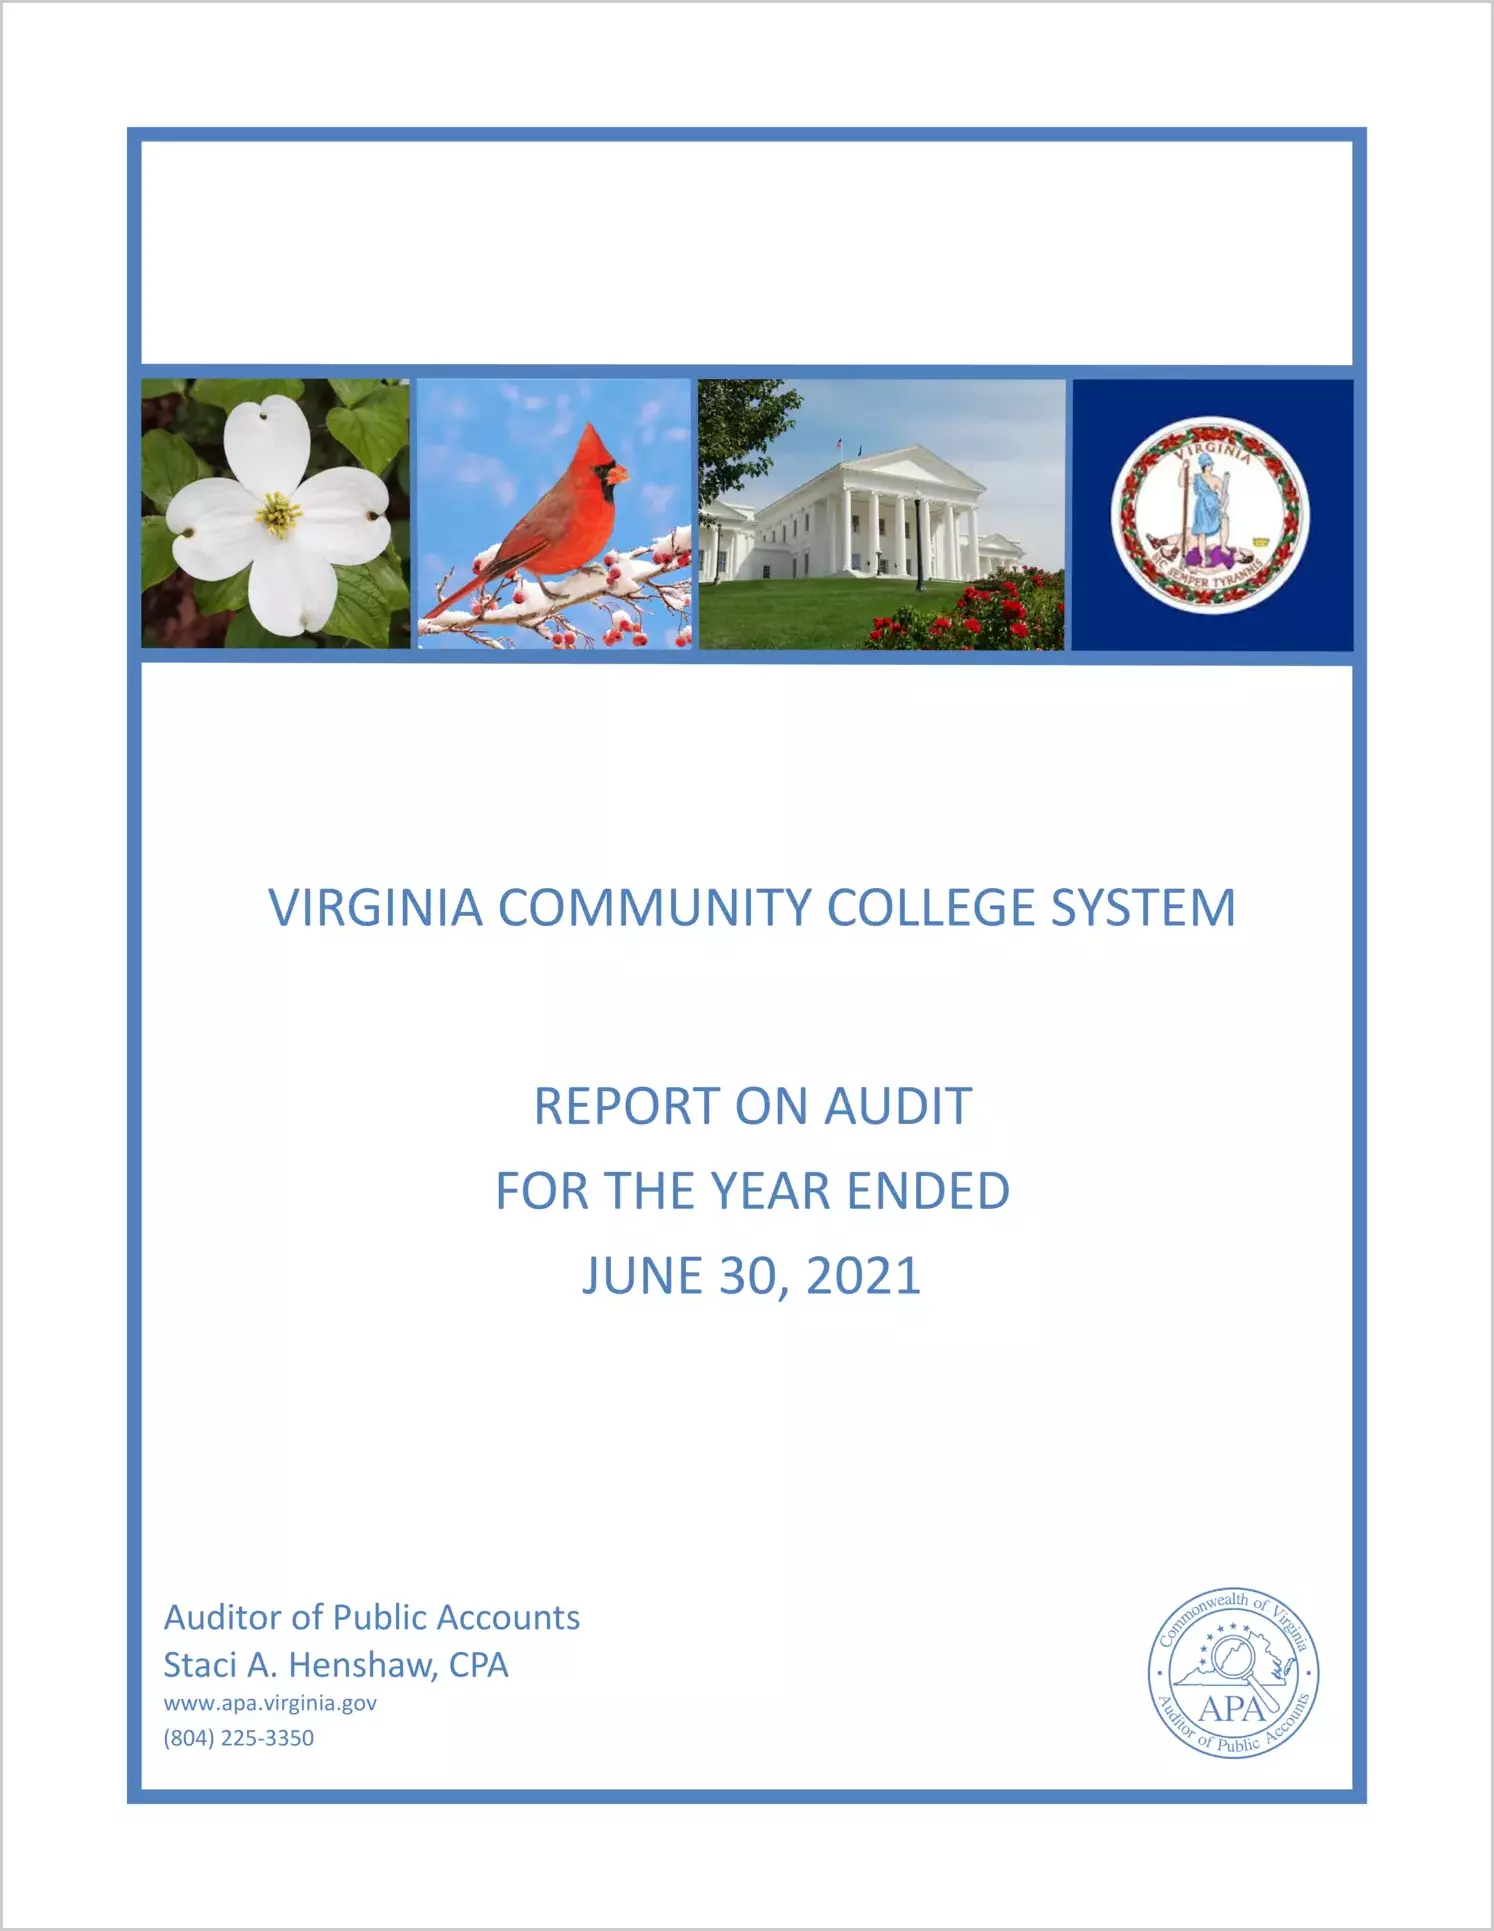 Virginia Community College System for the year ended June 30, 2021